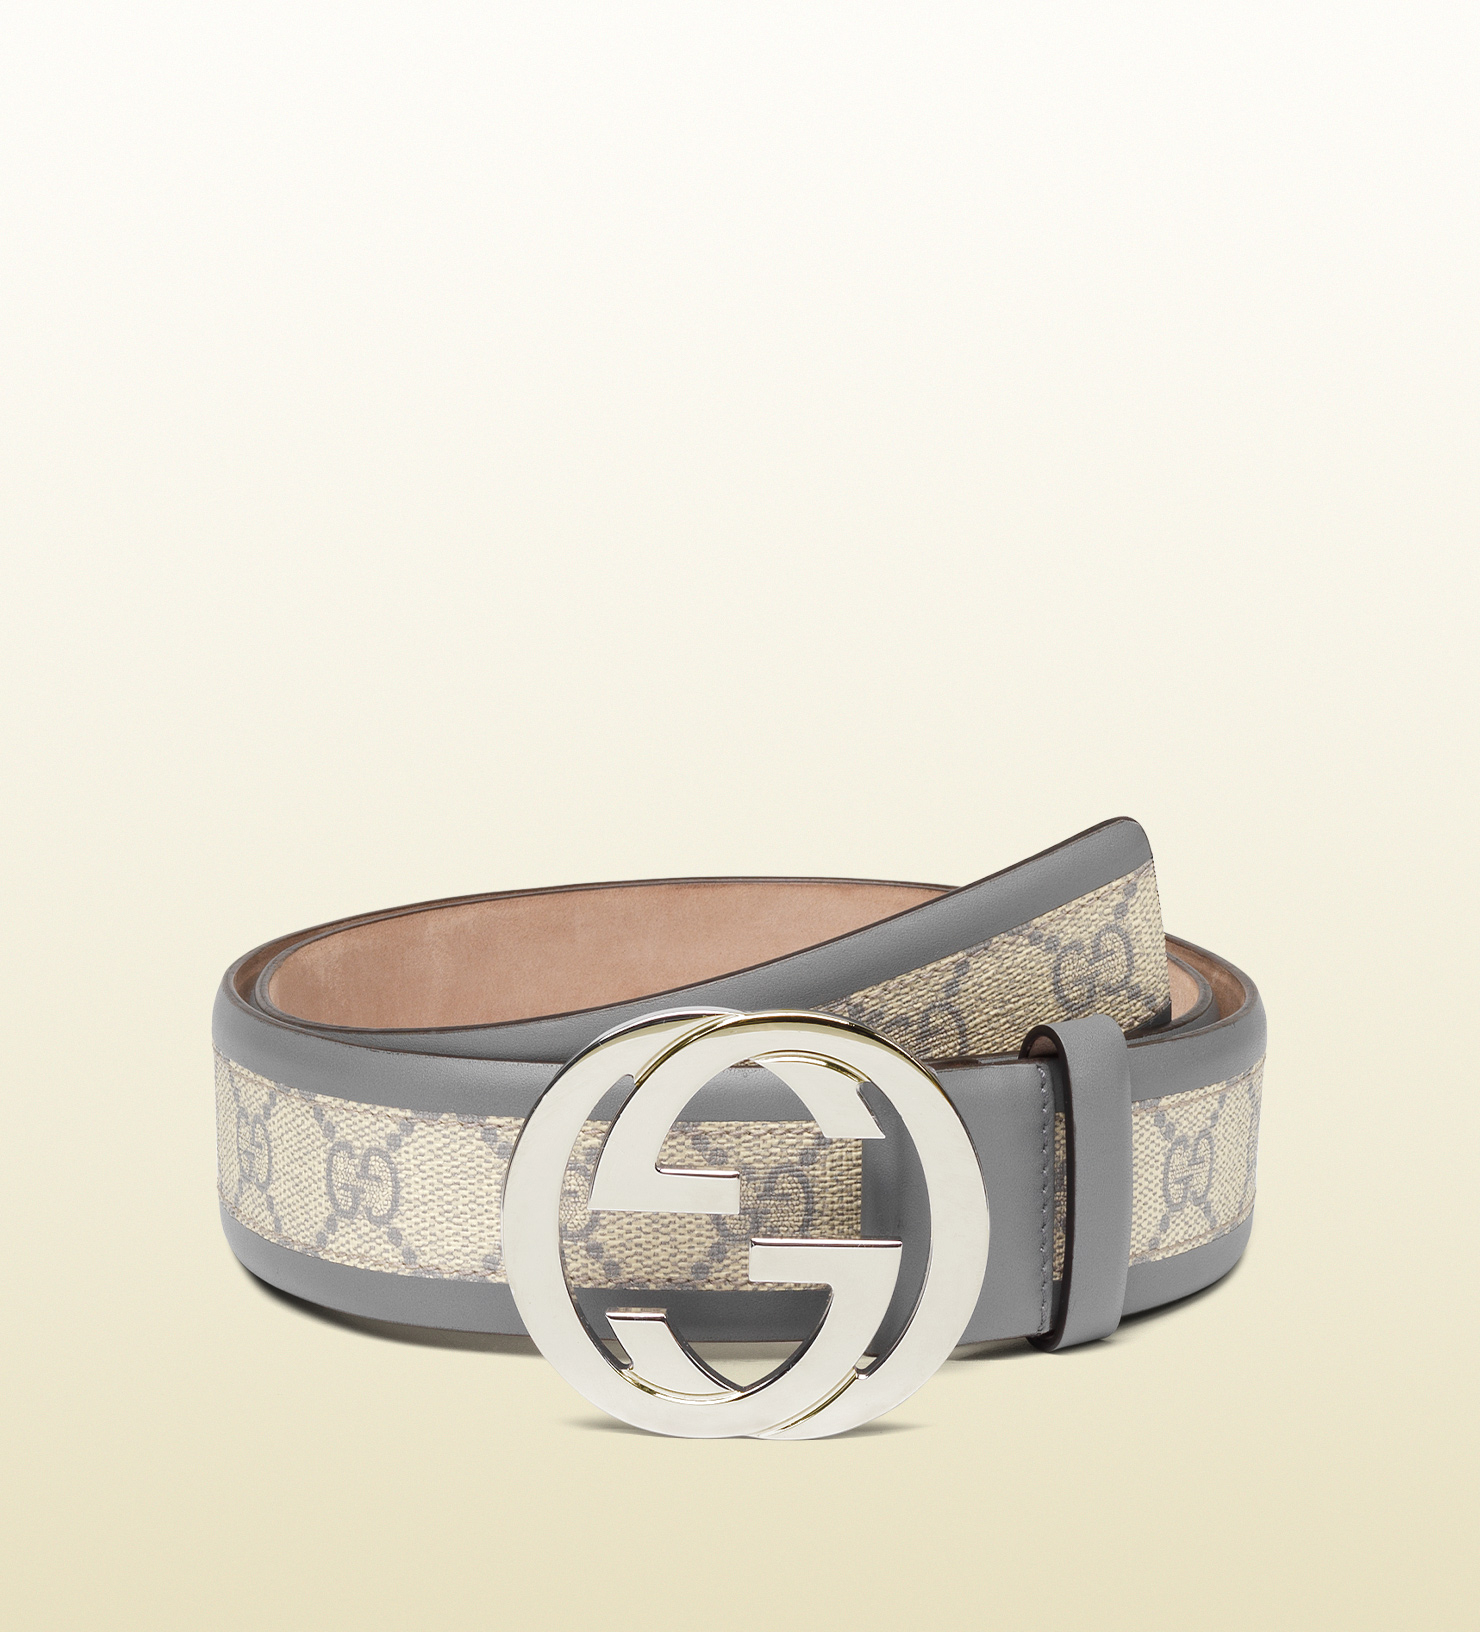 Lyst - Gucci Belt With Interlocking G Buckle in Gray for Men